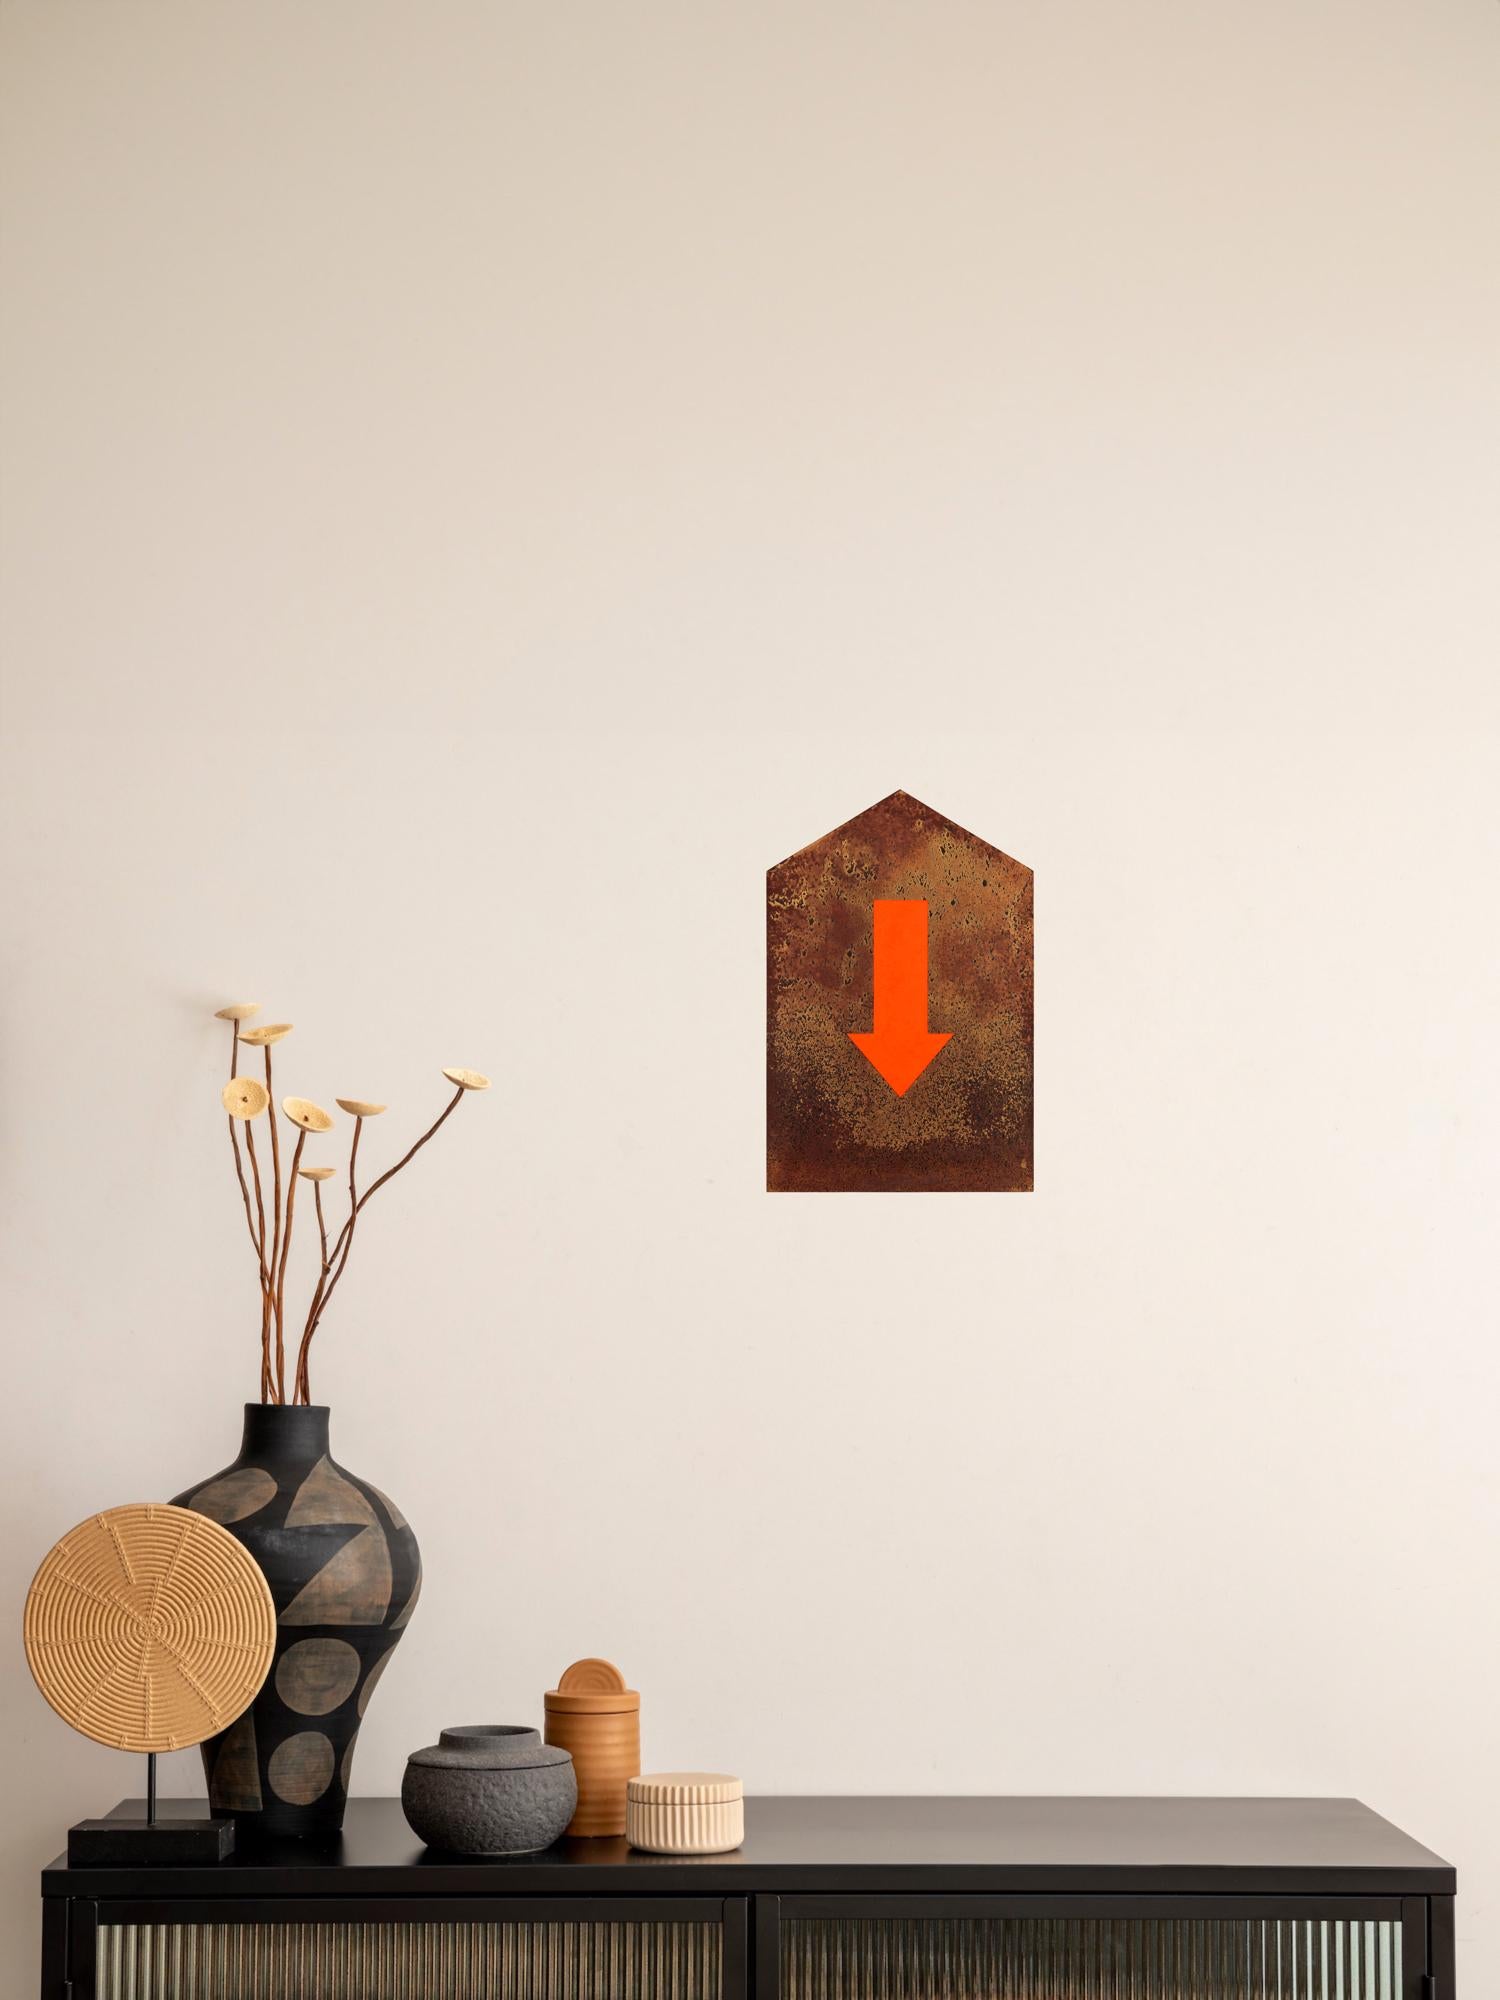 Hyperrealist oil painting of an oxidized, rusted metal road sign with orange directional arrow detail by Anthony Adcock. 

Medium: Oil and 23.5 gold leaf on aluminum. 
Size: 15 x 10 inches. 

**No metal or rust was used in this painting—it is an oil